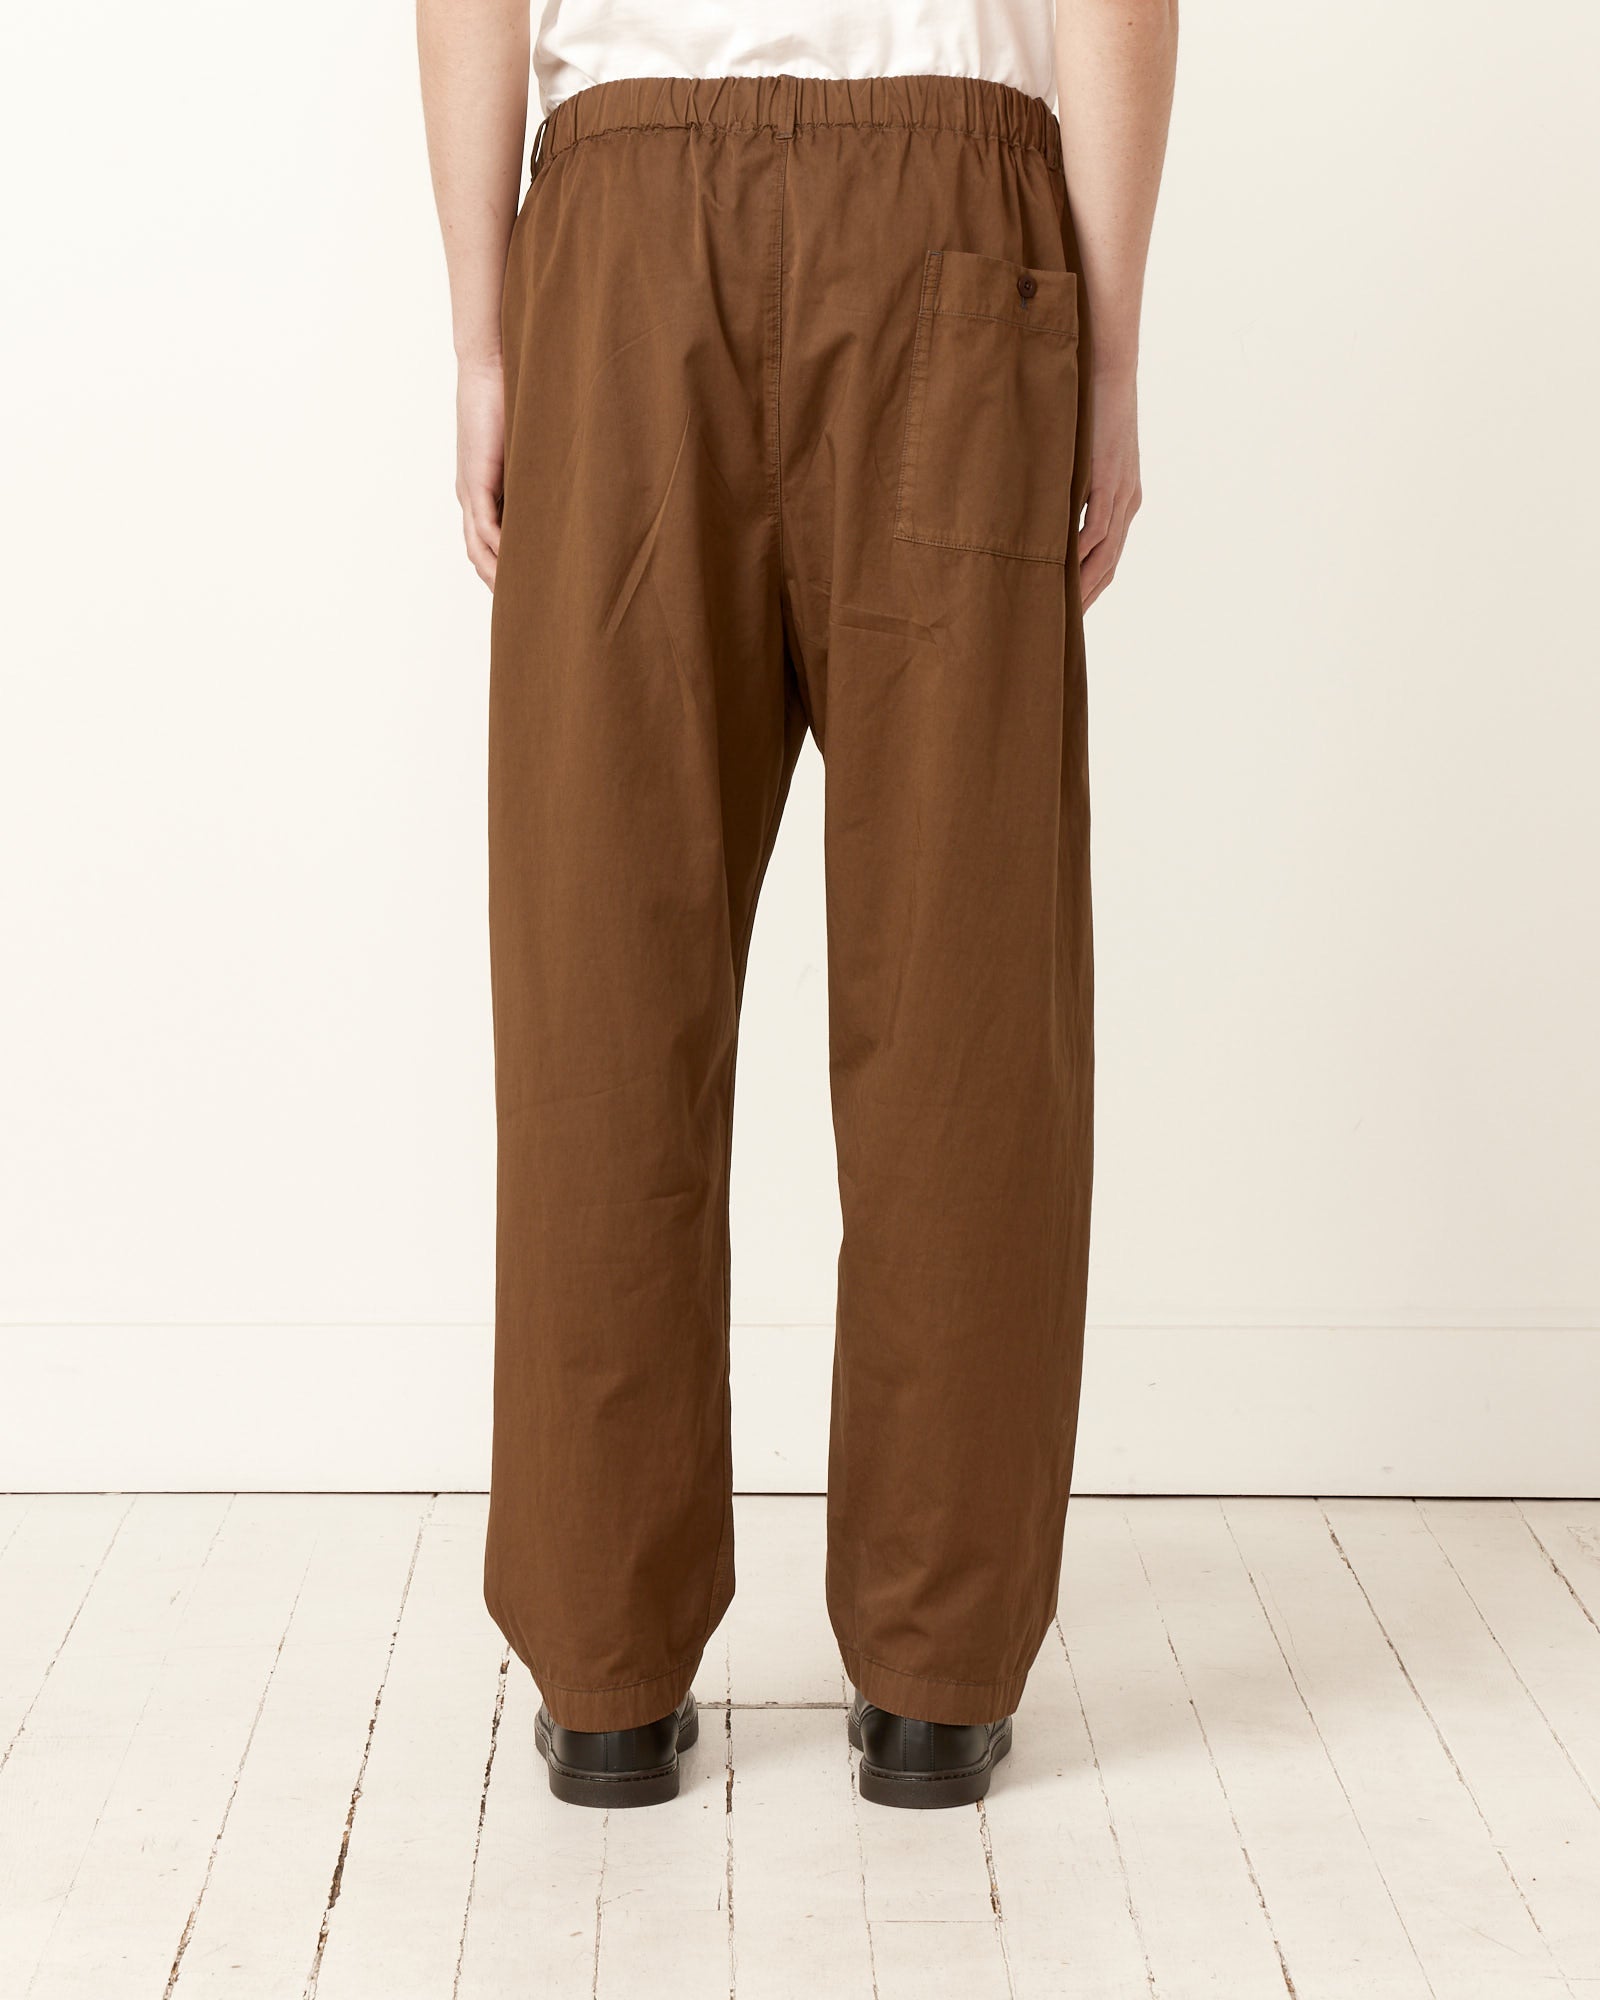 Relaxed Pant in Dark Tobacco